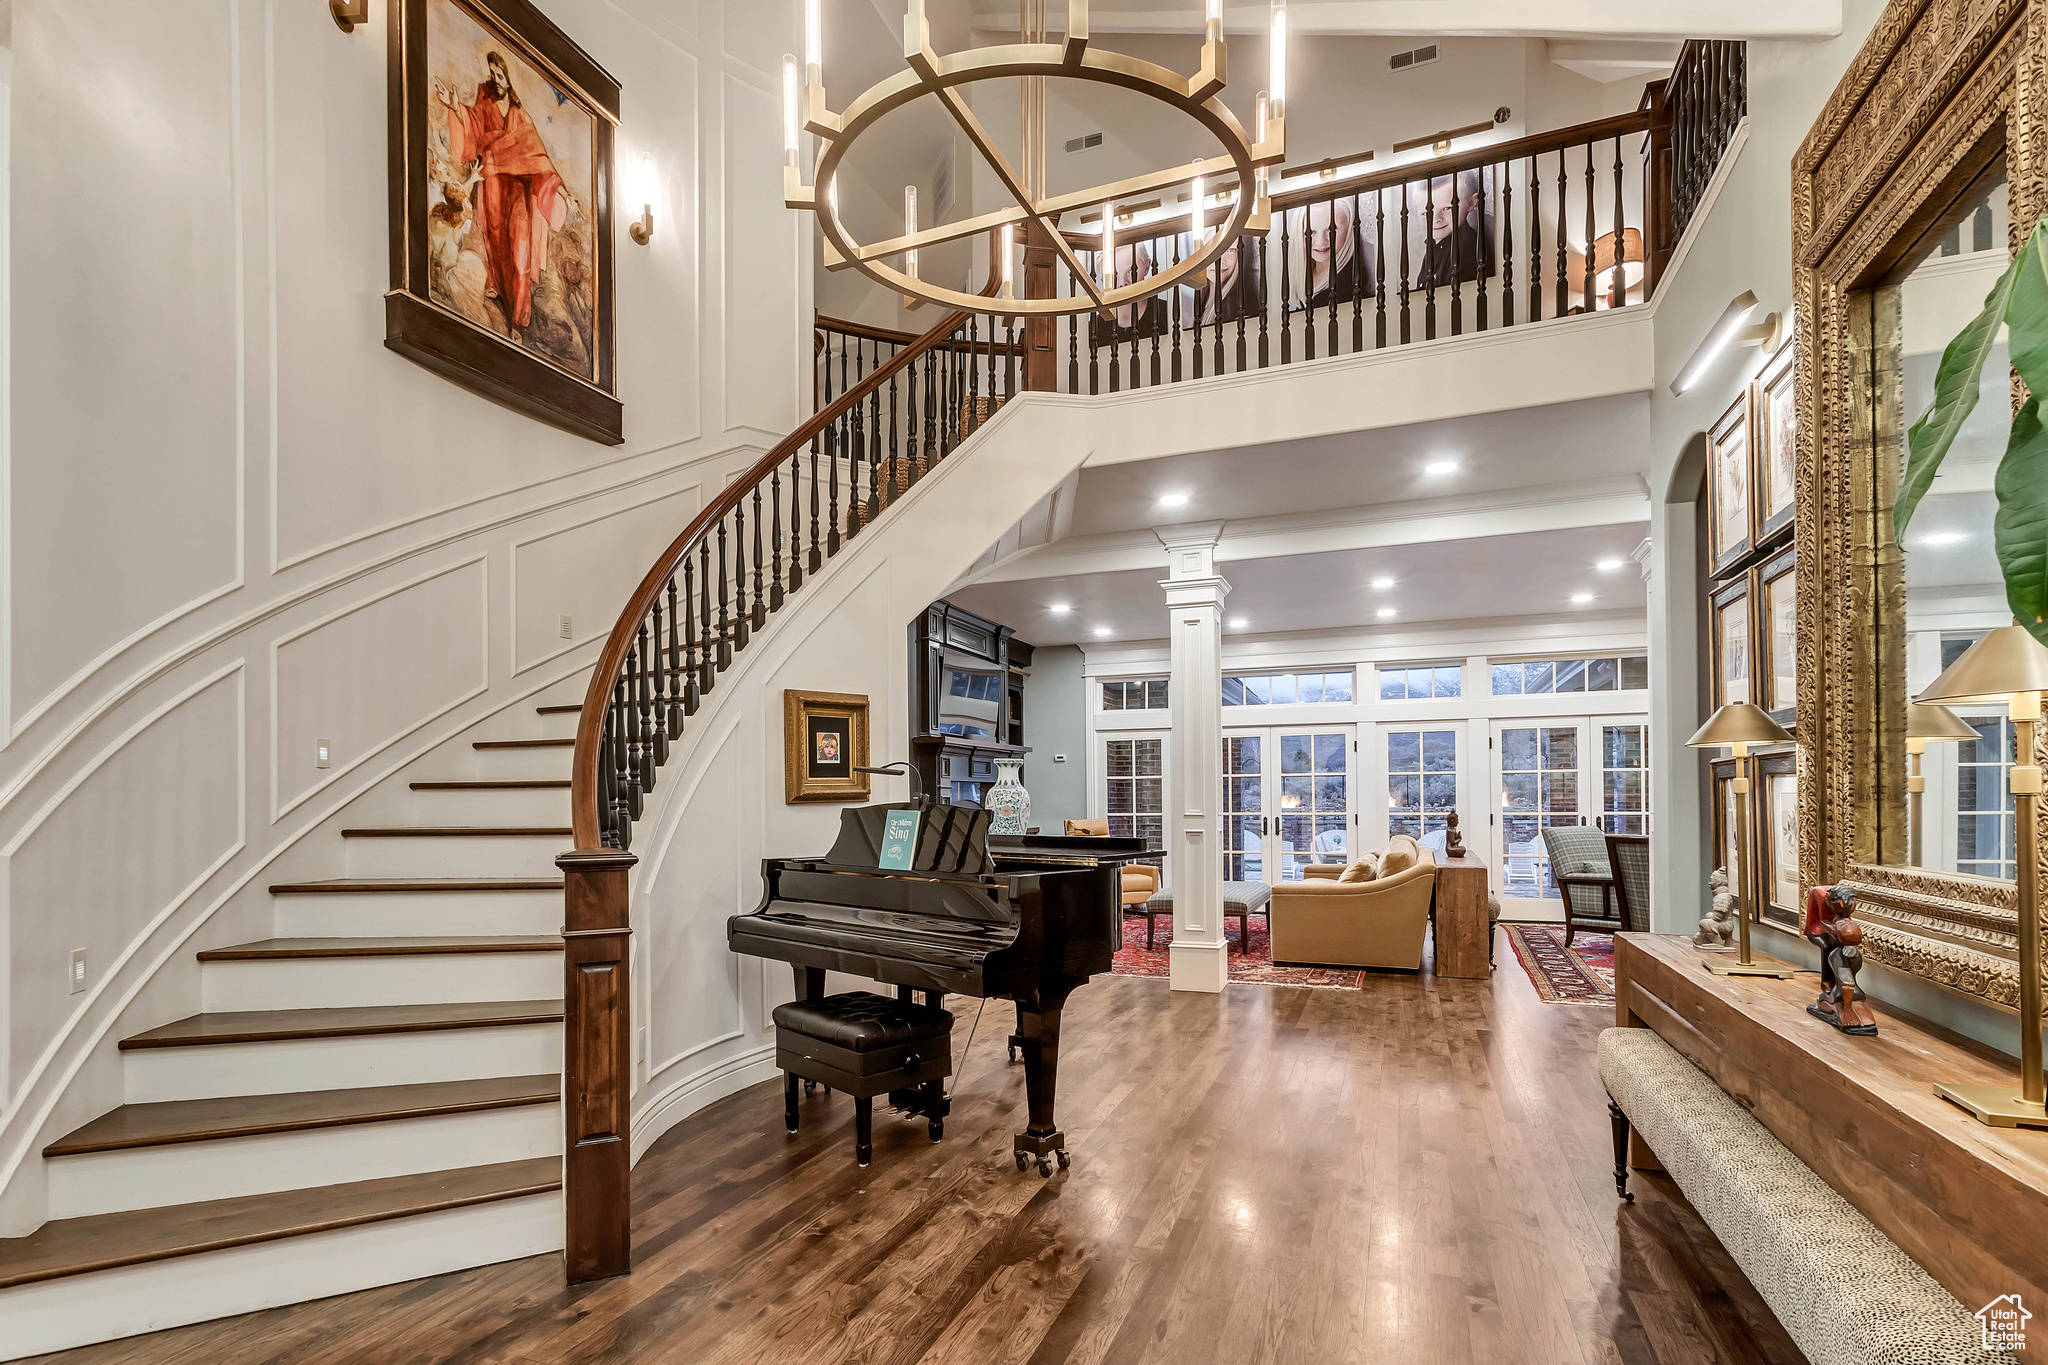 Foyer entrance featuring decorative columns, dark wood flooring, a notable chandelier, and a towering ceiling